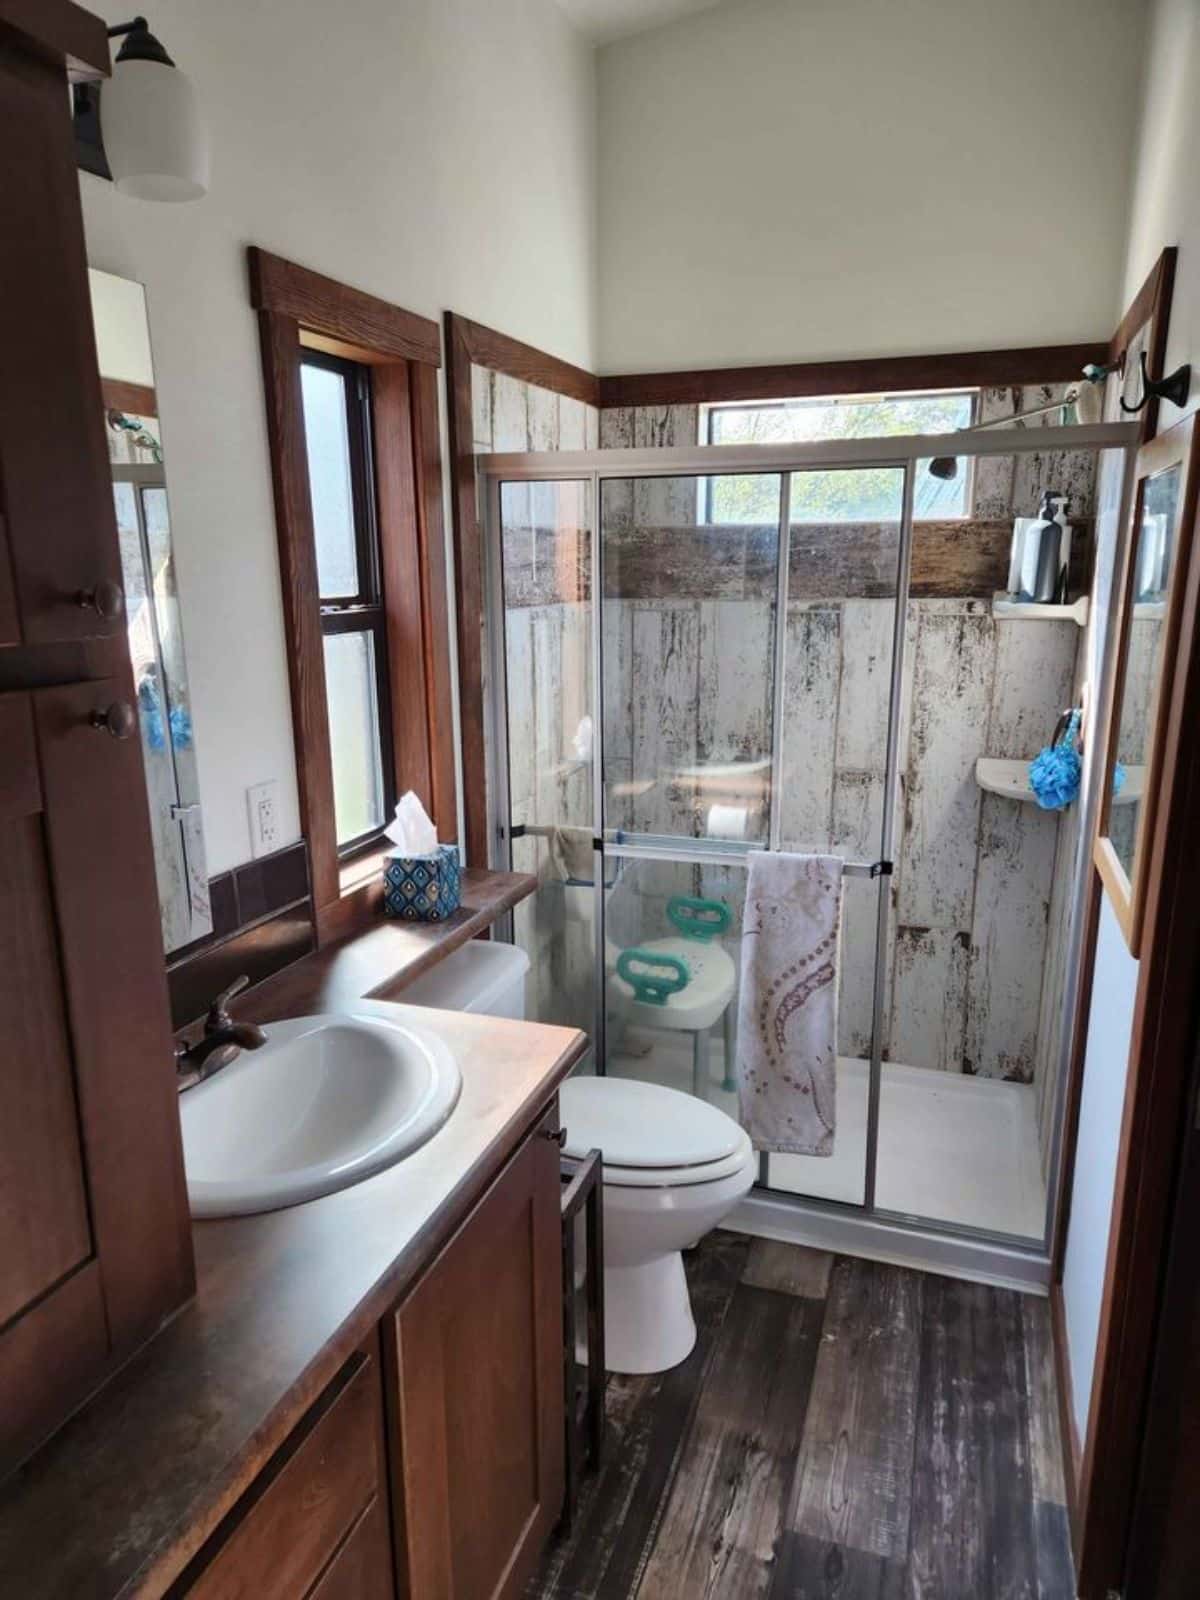 bathroom of cottage tiny home has all the standard fittings